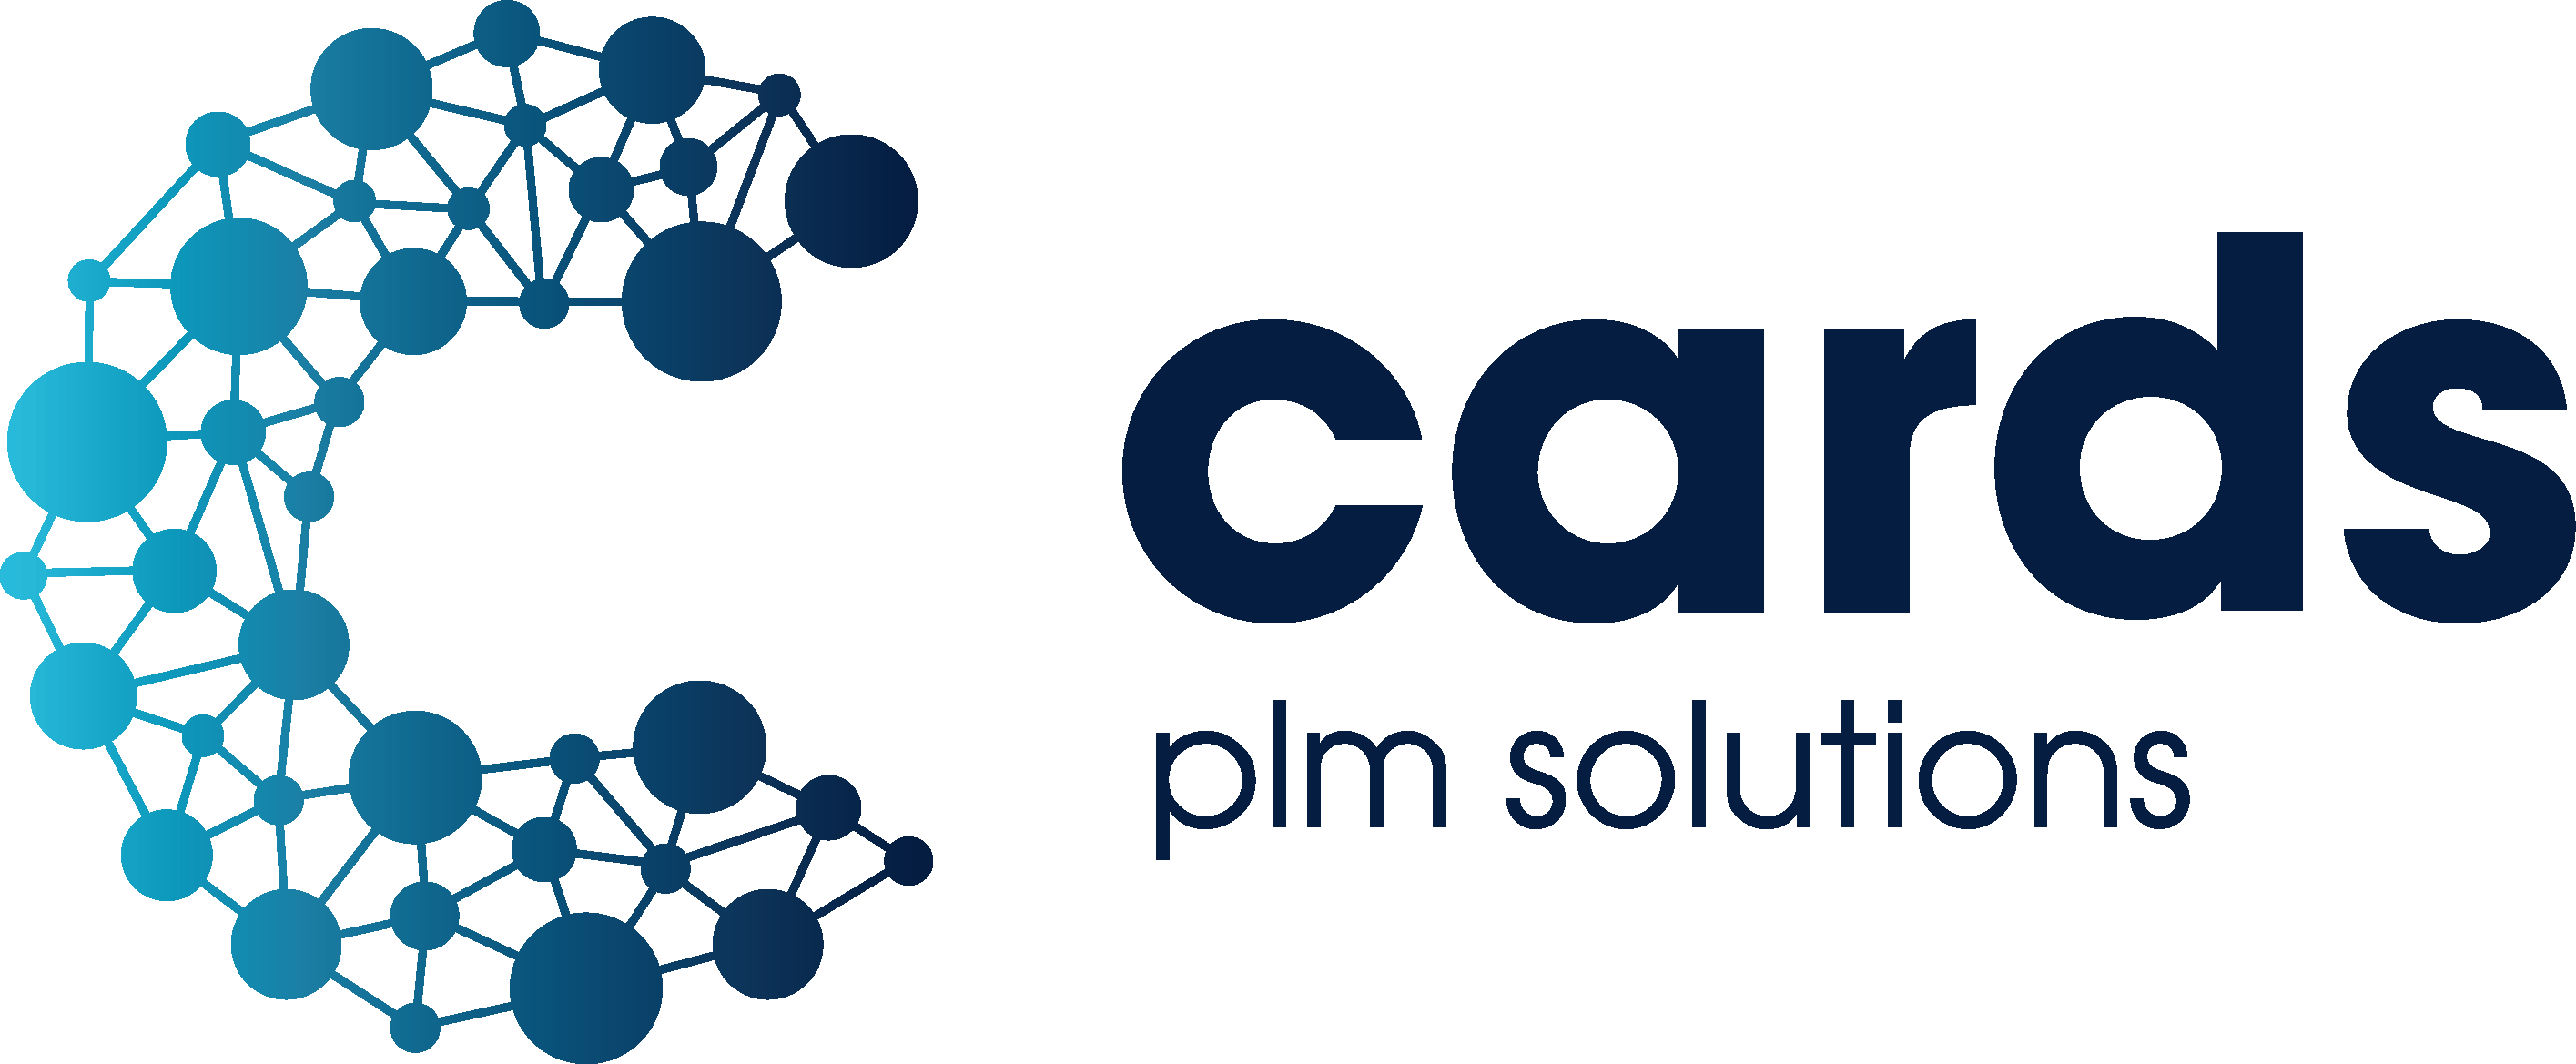 Cards PLM Solutions
